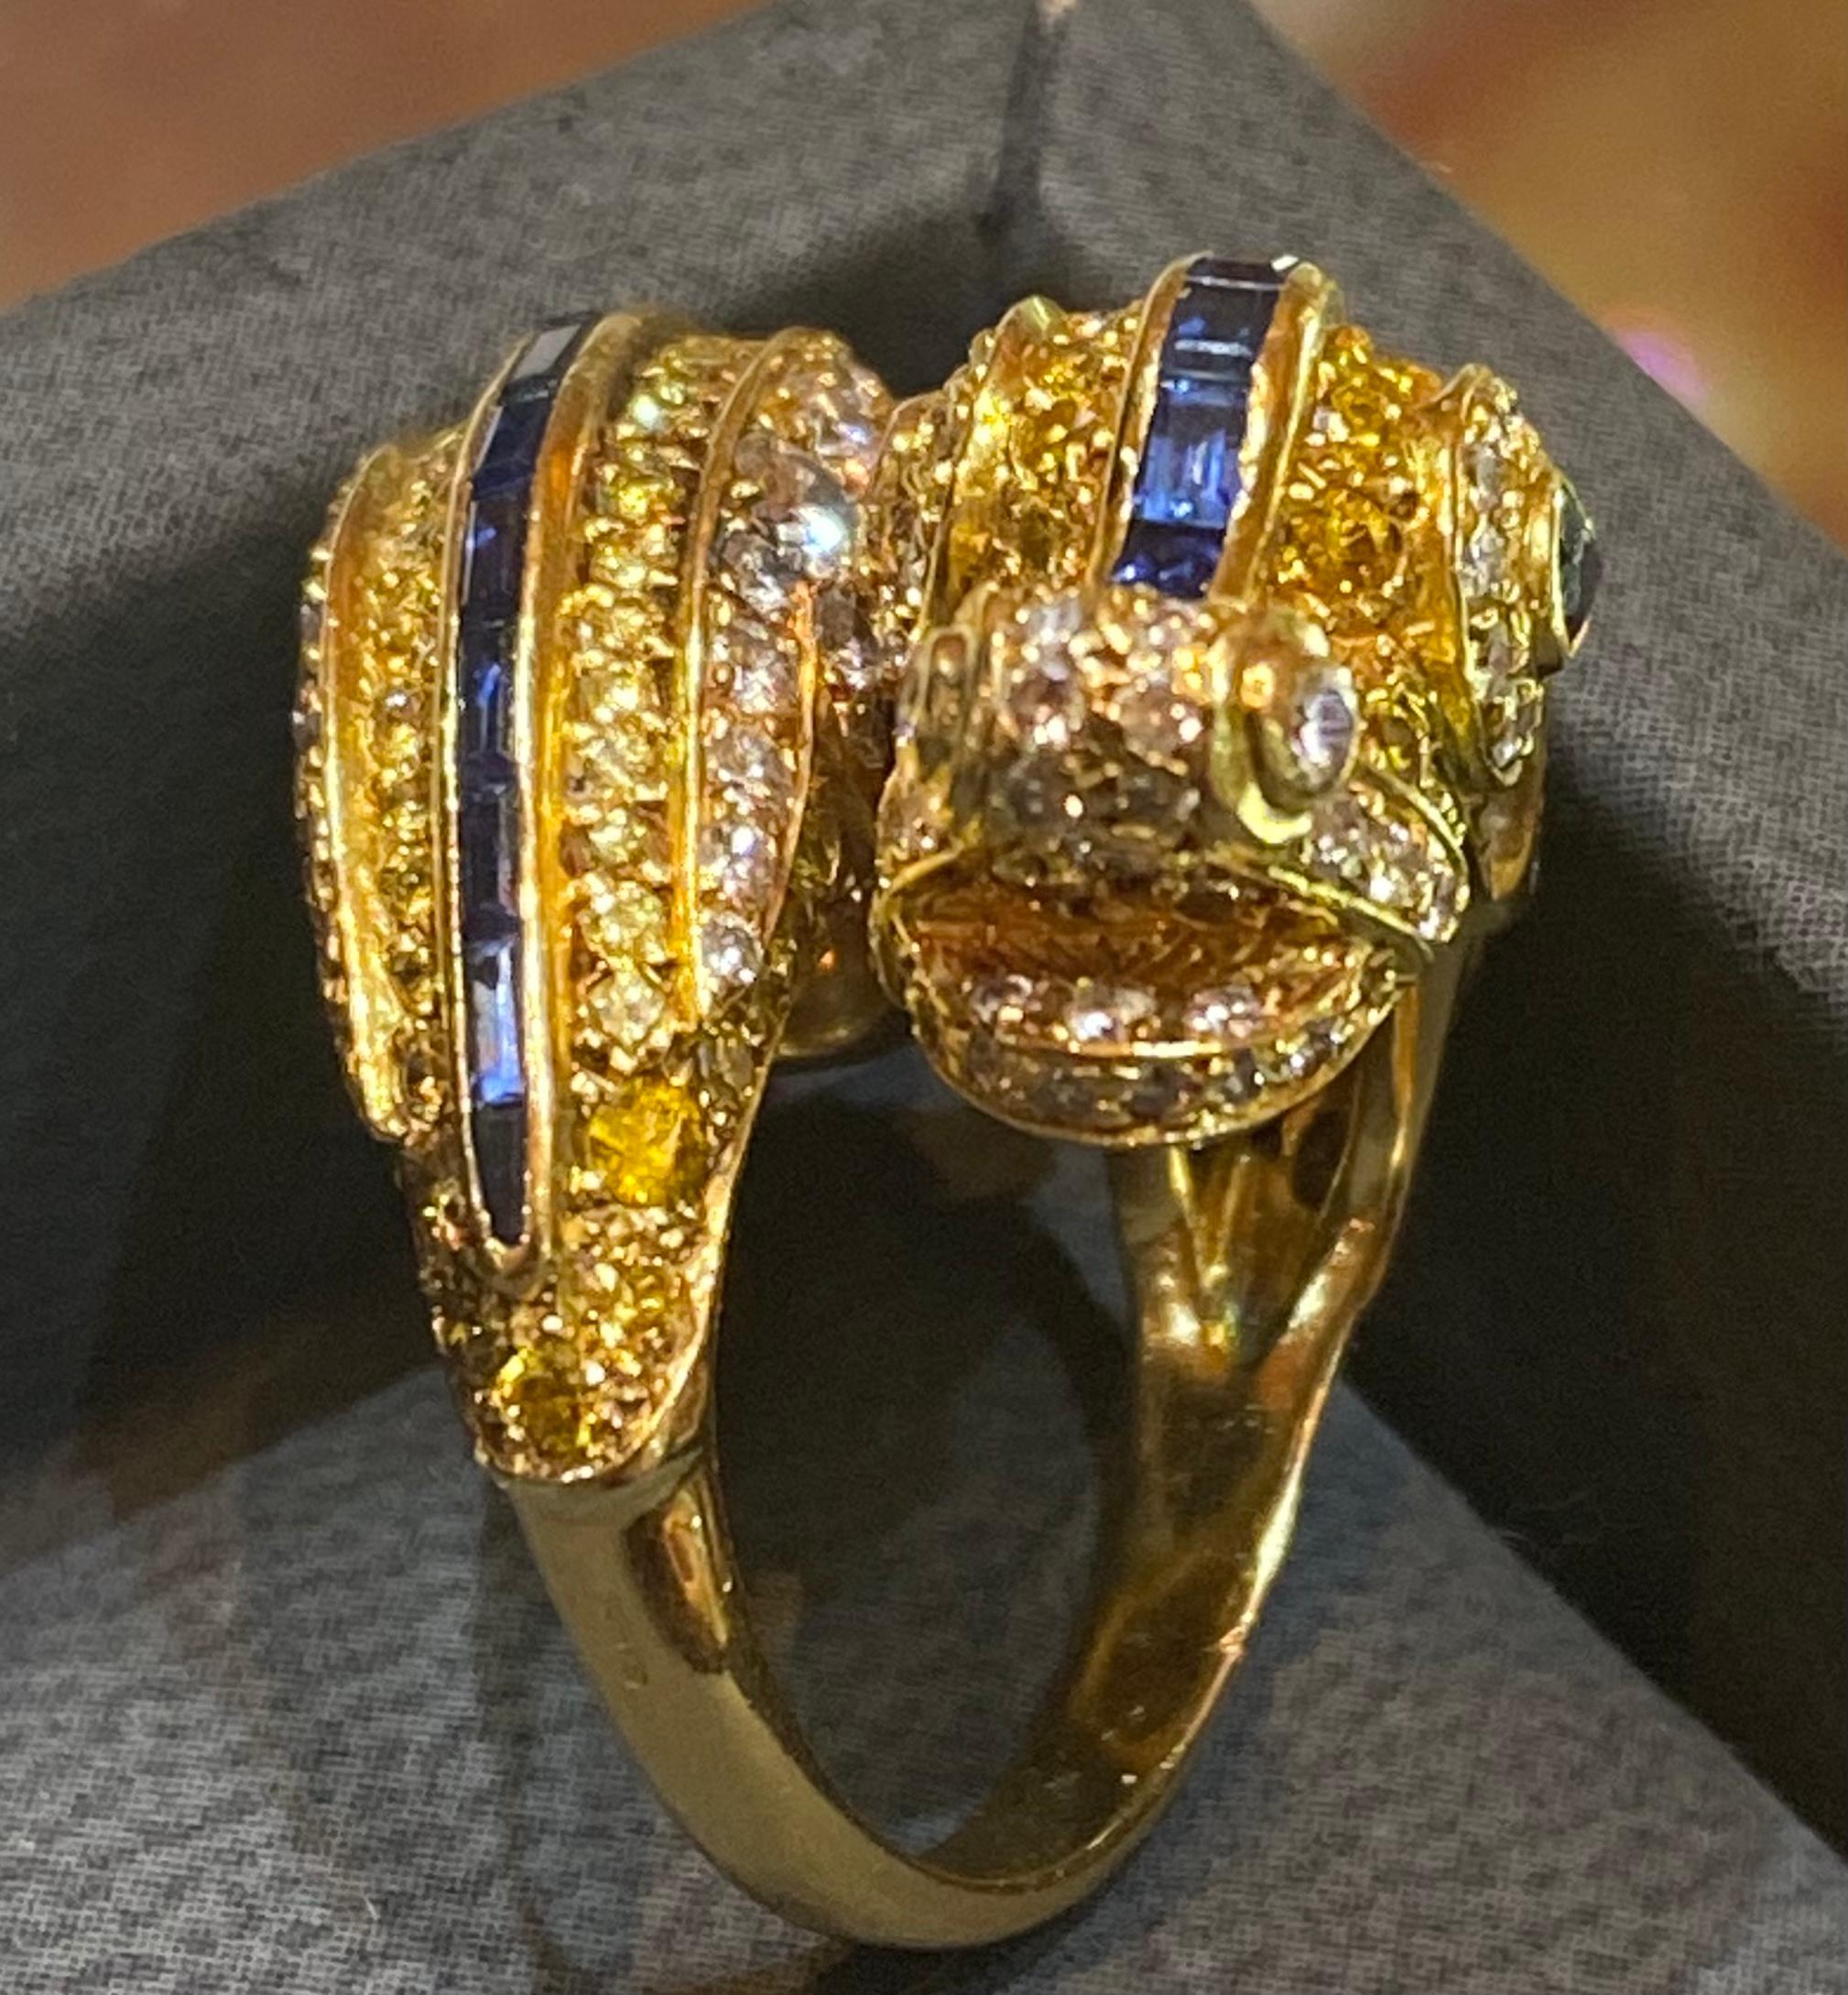 Extremely Rare and Iconic Fancy Yellow Diamond Chimeres Ring by Cartier 3